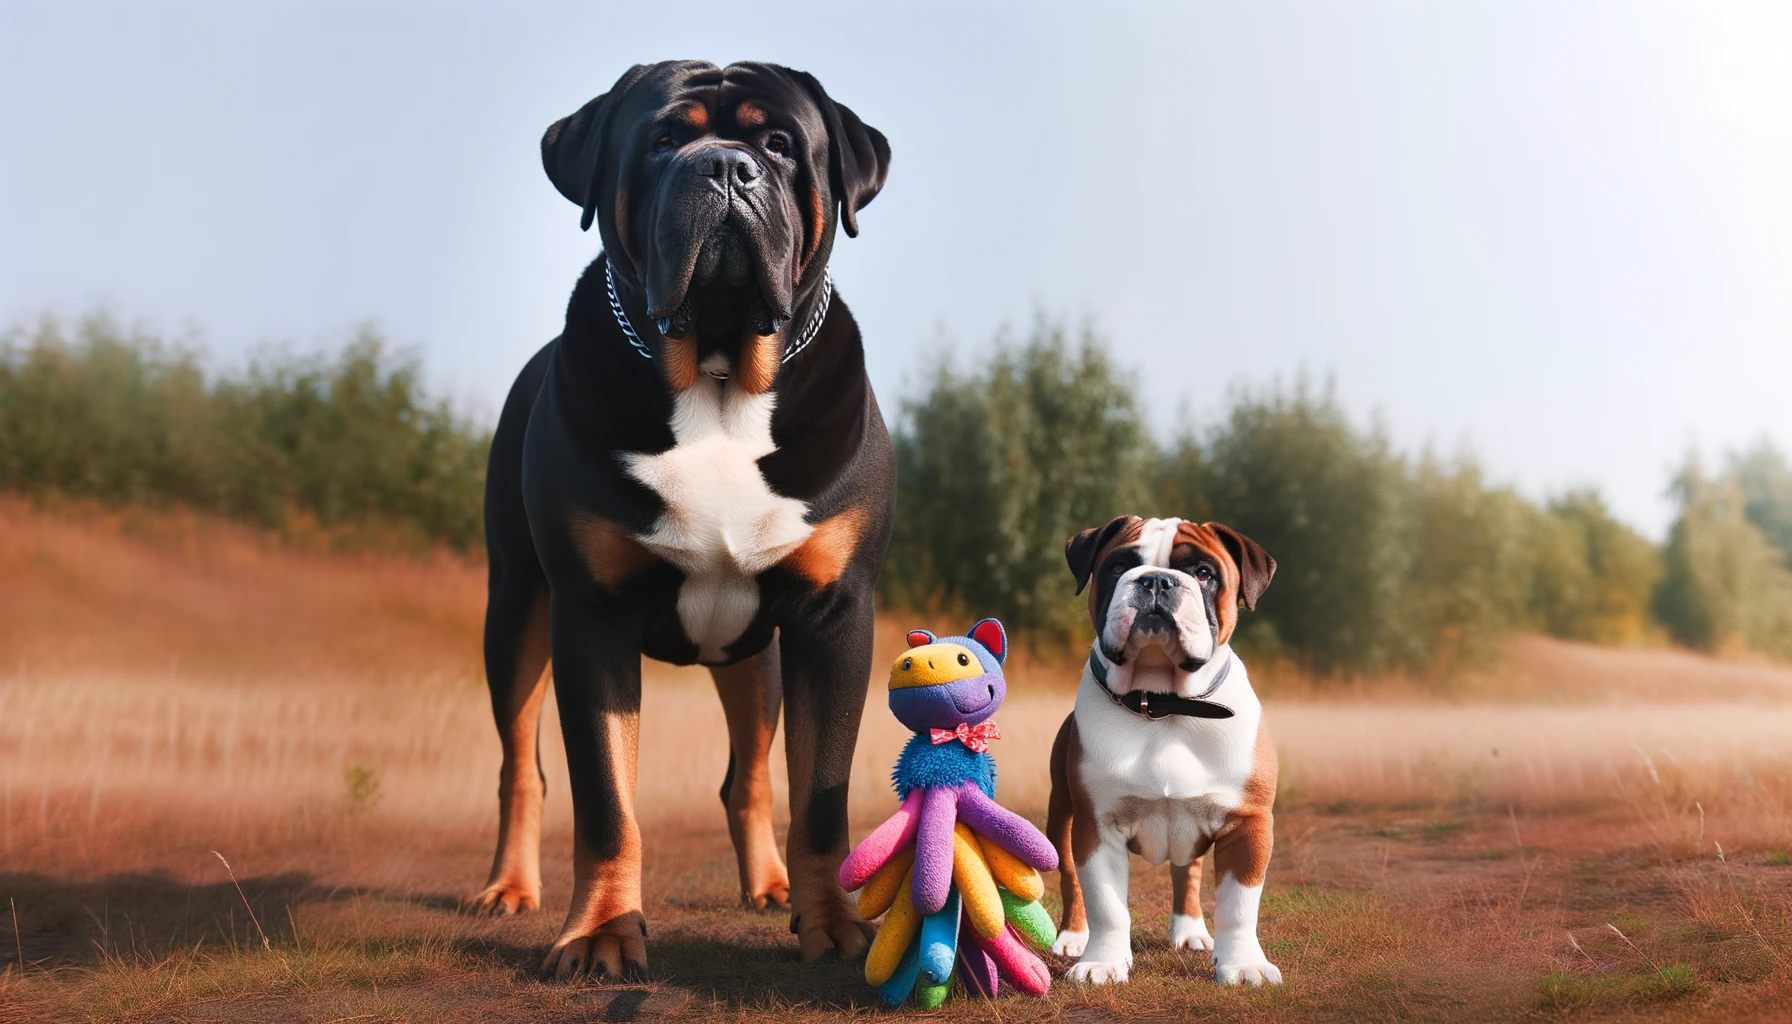 Photo of a male Bullador dog standing taller than a female on a grassy terrain. While the male towers above, the female confidently hogs a colorful squeaky toy, demonstrating her assertive nature despite the size difference.